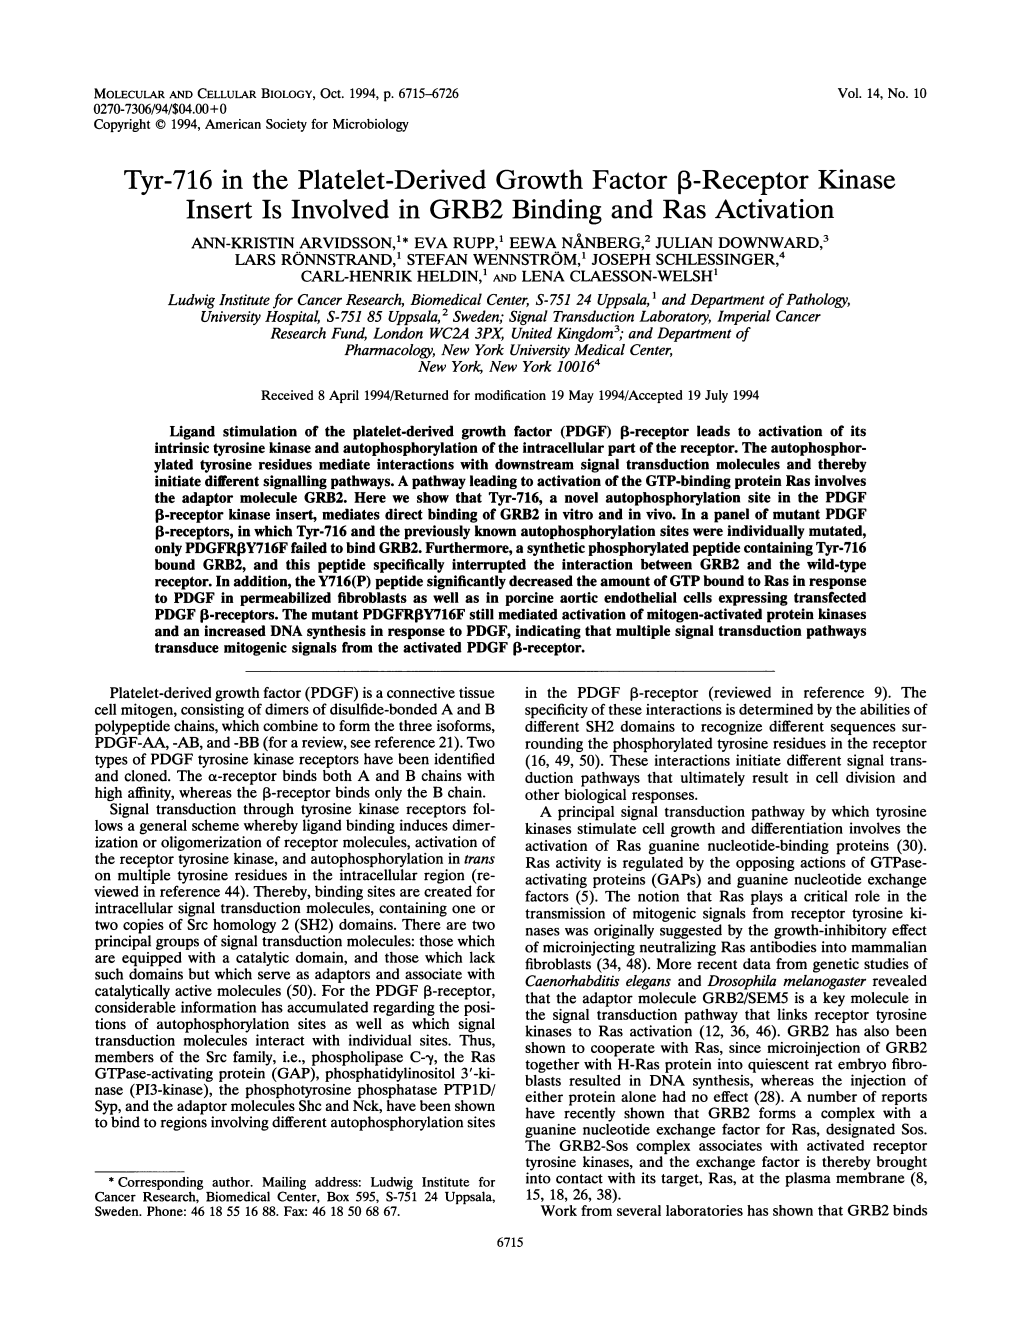 Tyr-716 in the Platelet-Derived Growth Factor 3-Receptor Kinase Insert Is